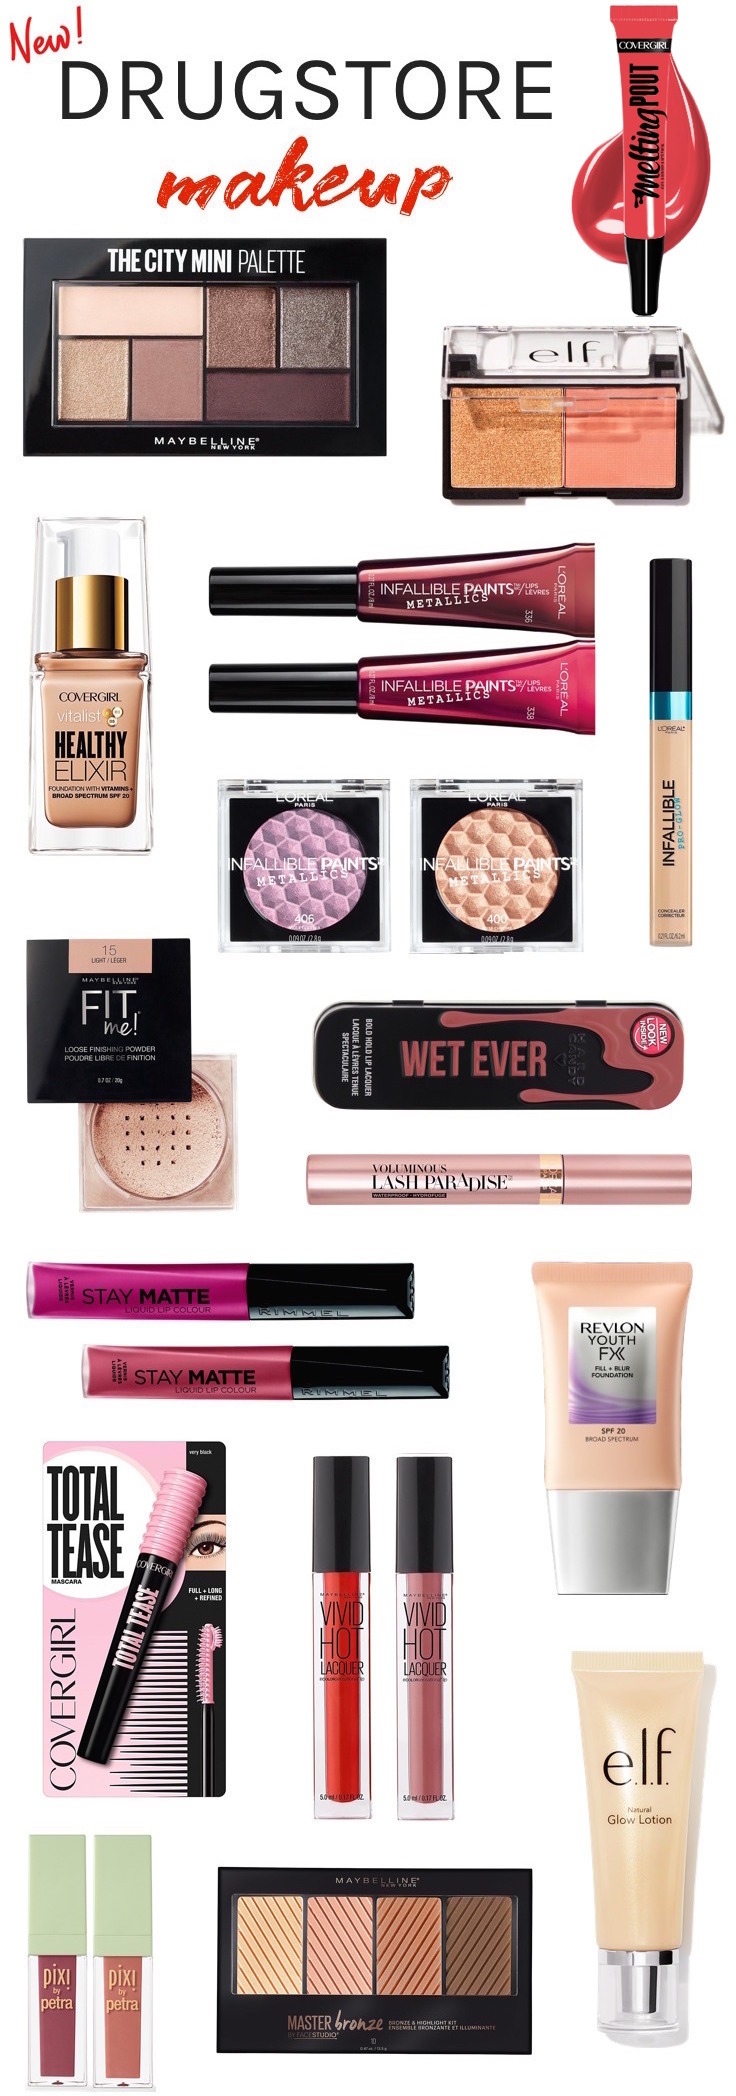 New drugstore makeup summer 2017 | Want to know what's new in the drugstore beauty aisles? Check out the latest launches that you’ll want to get your hands on...and don't be surprised if you want them all! 